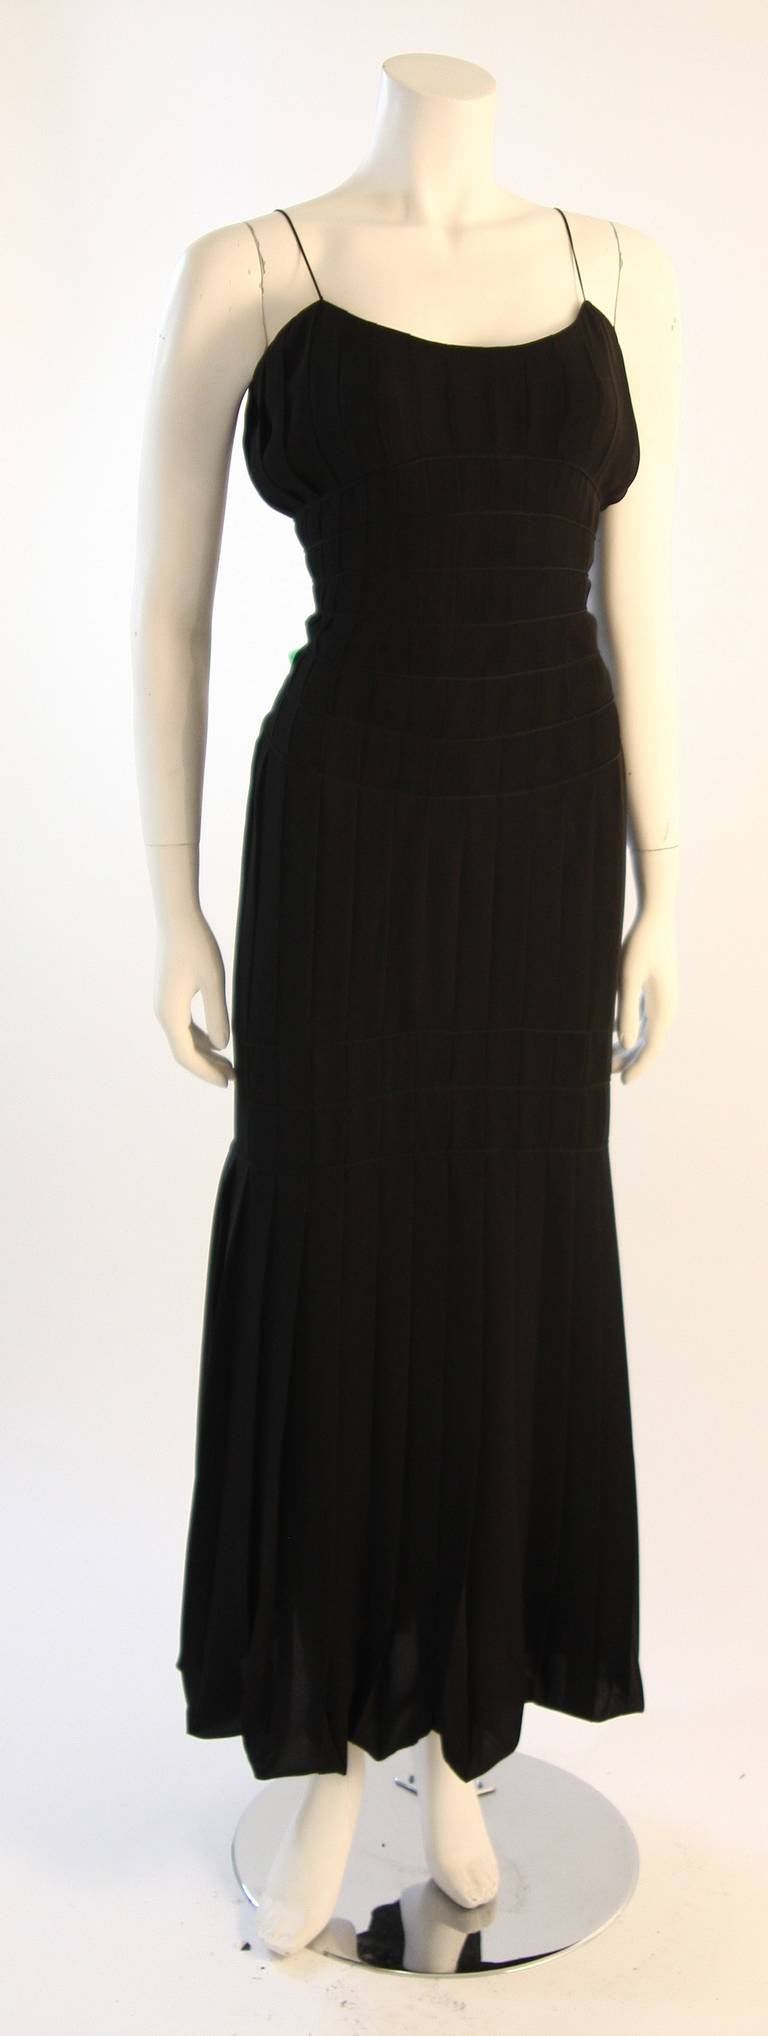 Black Gorgeous Thierry Mugler Silk Pleated Evening Gown with Tassels Size 38 For Sale